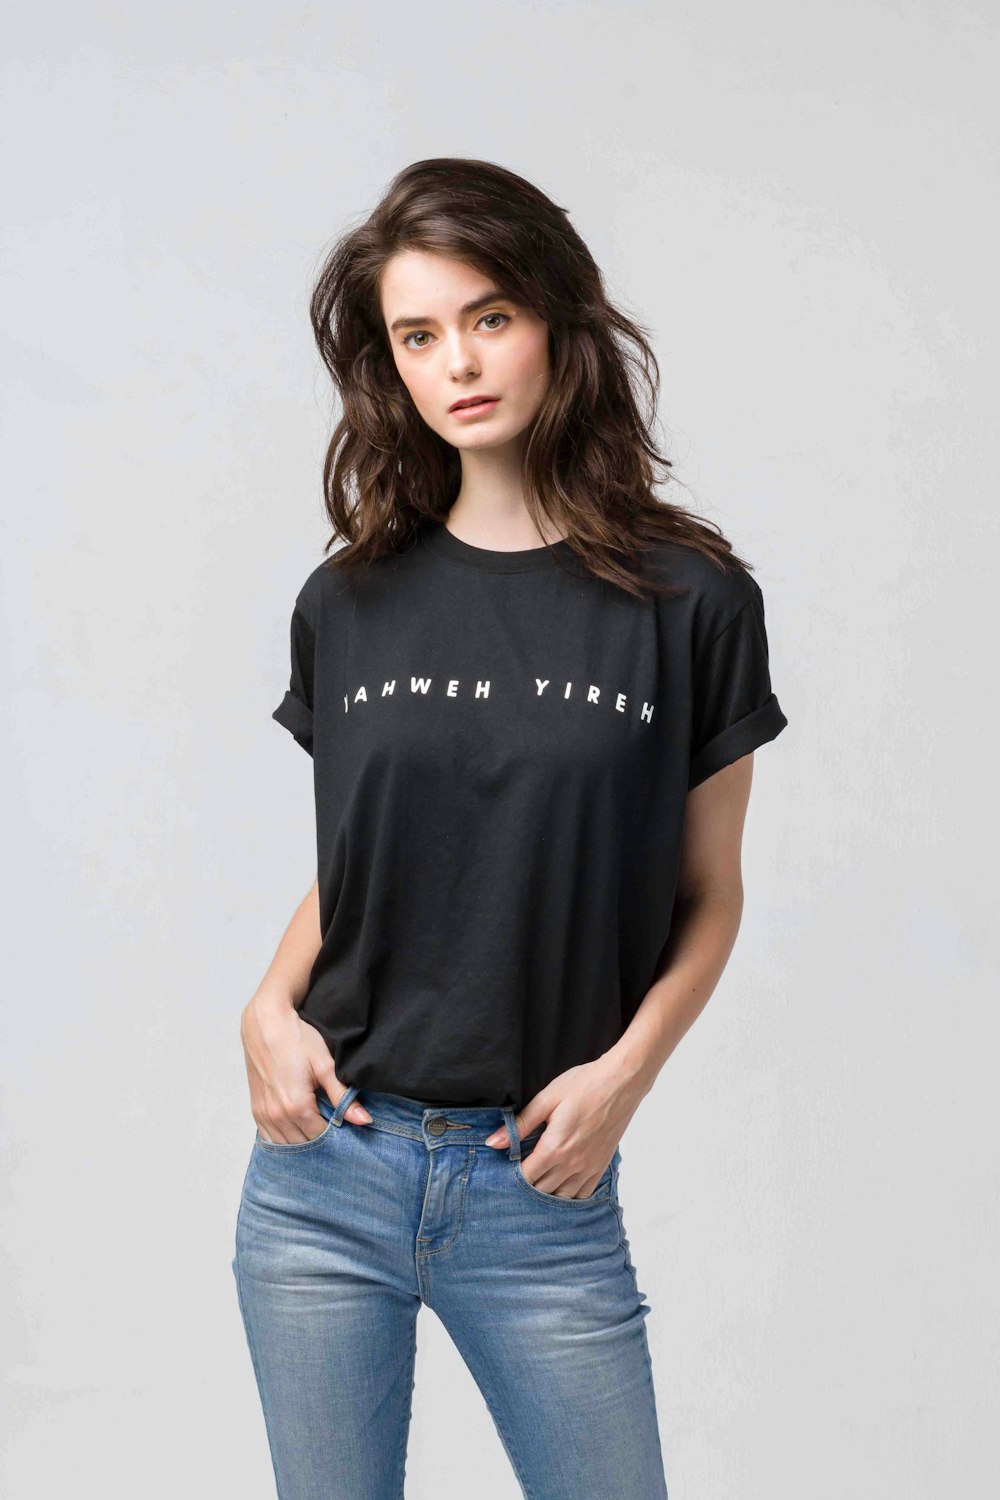 woman in black crew neck t-shirt and blue denim jeans standing beside wall  with graffiti photo – Free Apparel Image on Unsplash